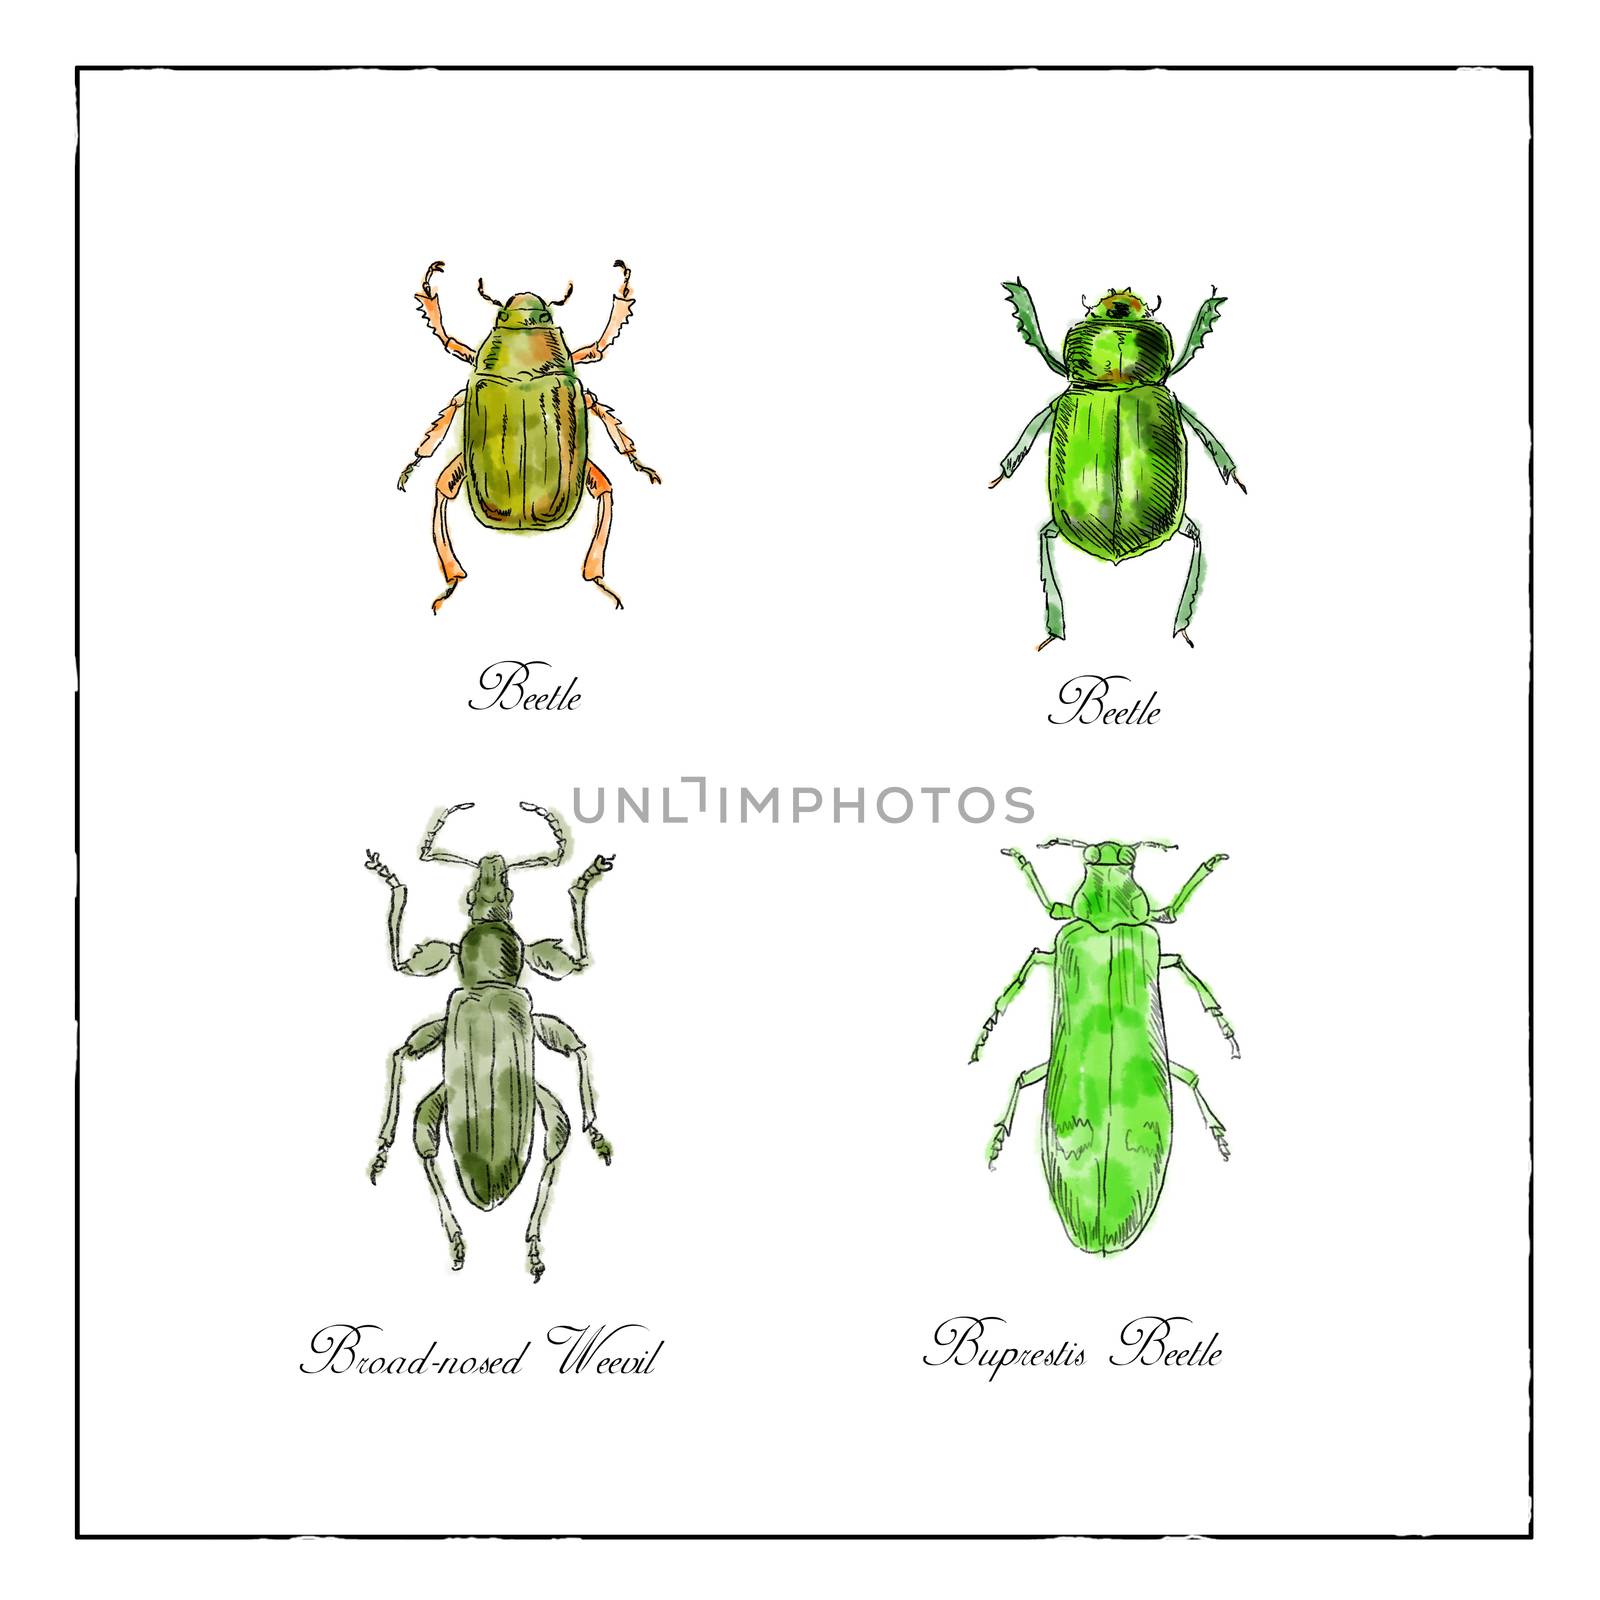 Vintage Victorian drawing illustration of a collection of insects like the Beetle, Broad-Nosed Weevil and Buprestis Beetle in full color on isolated white background.